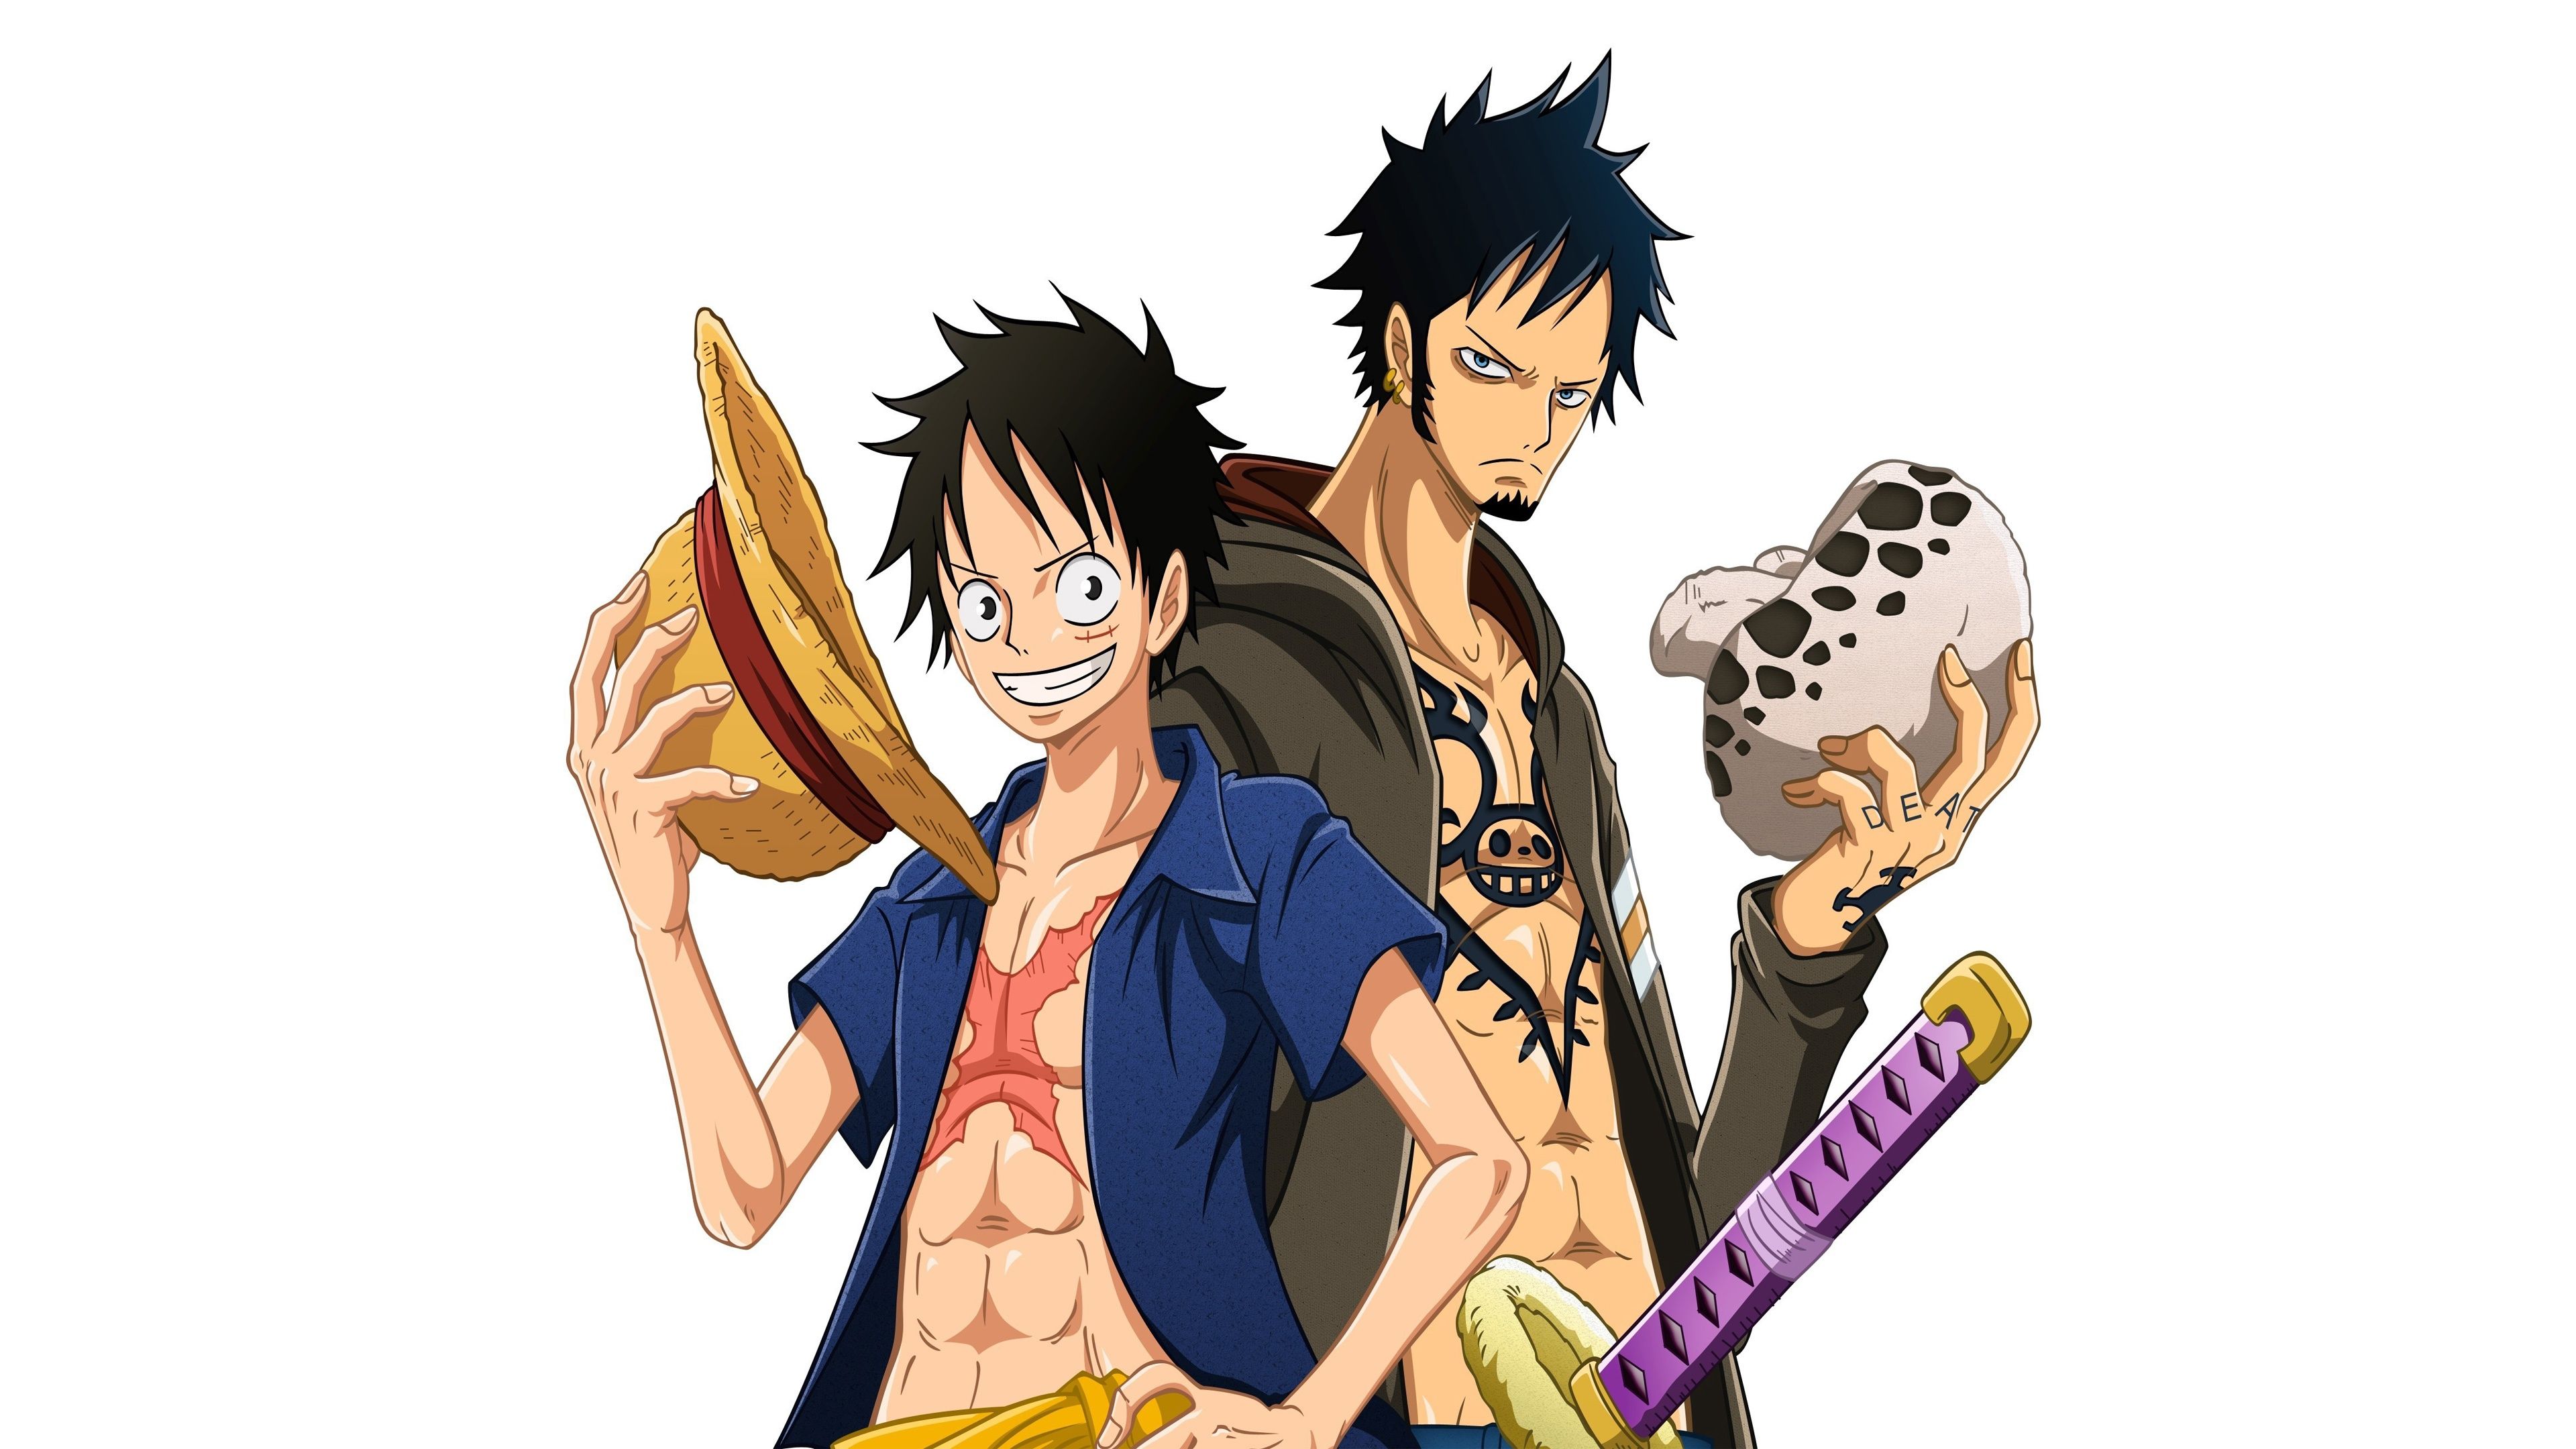 One Piece Luffy Law Wallpaper in jpg format for free download